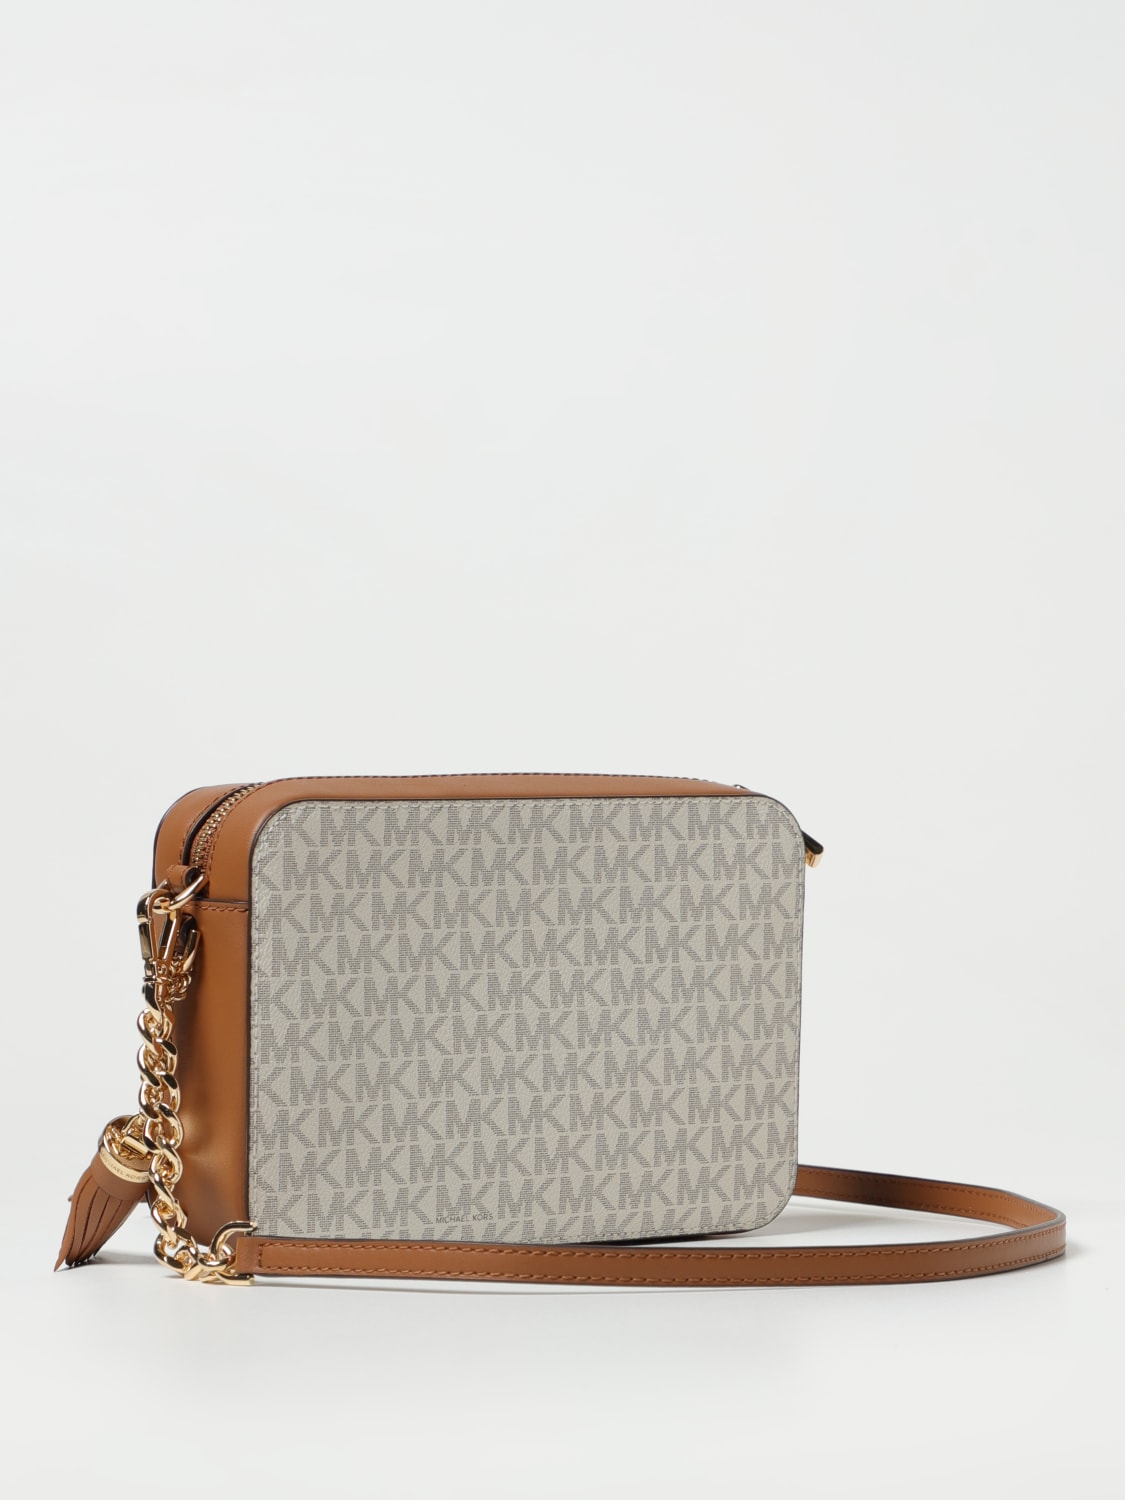 Bags from Michael Kors for Women in Brown